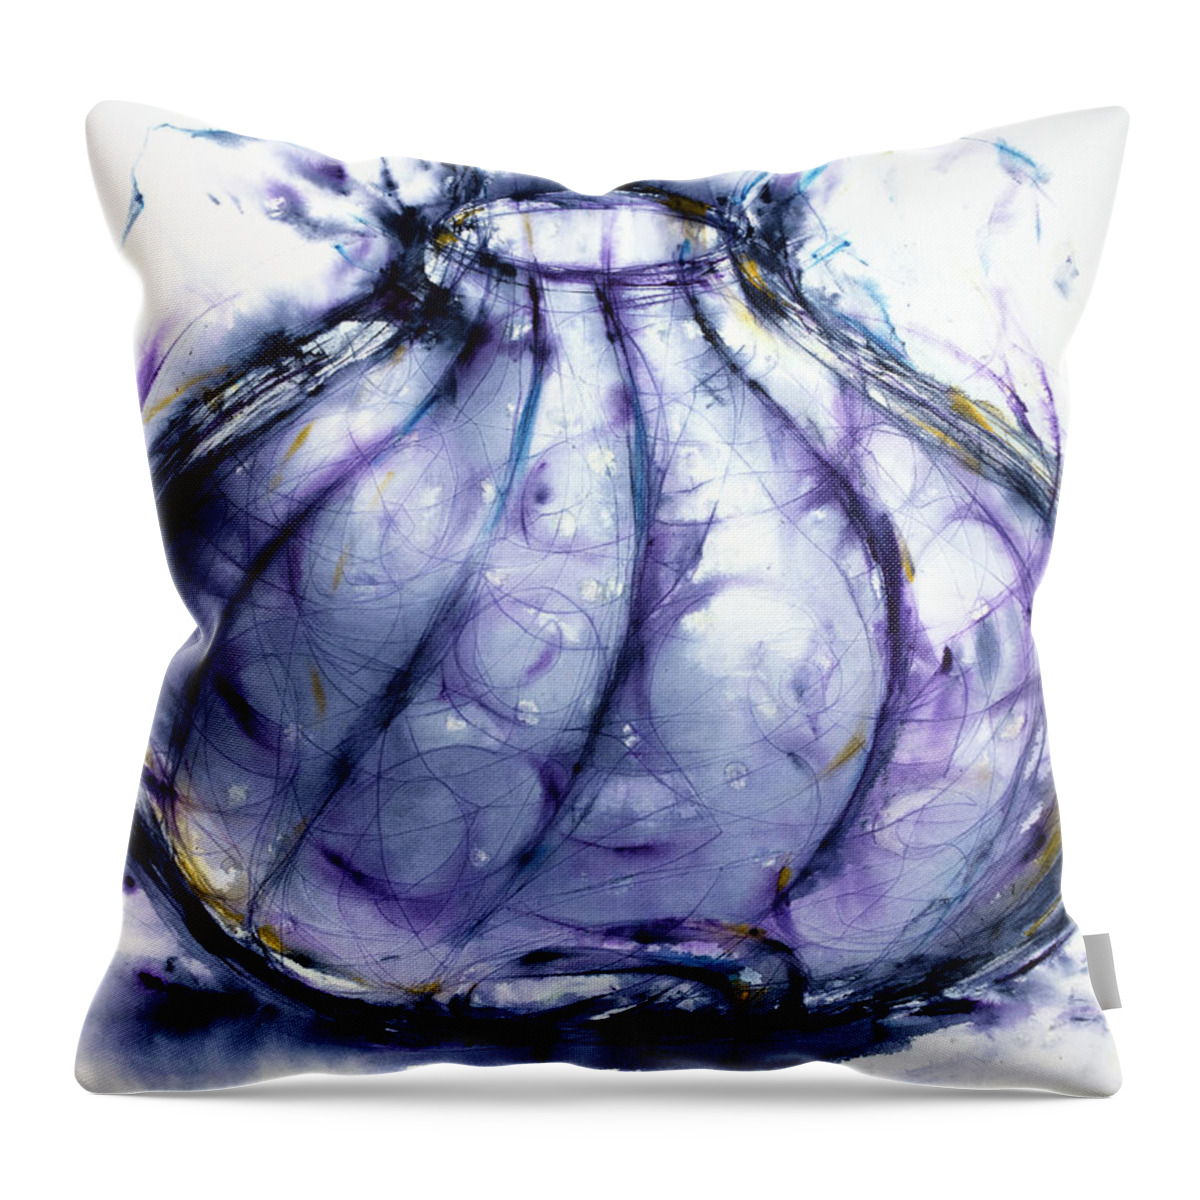  Throw Pillow featuring the painting 'Vessel of Tears' by Petra Rau